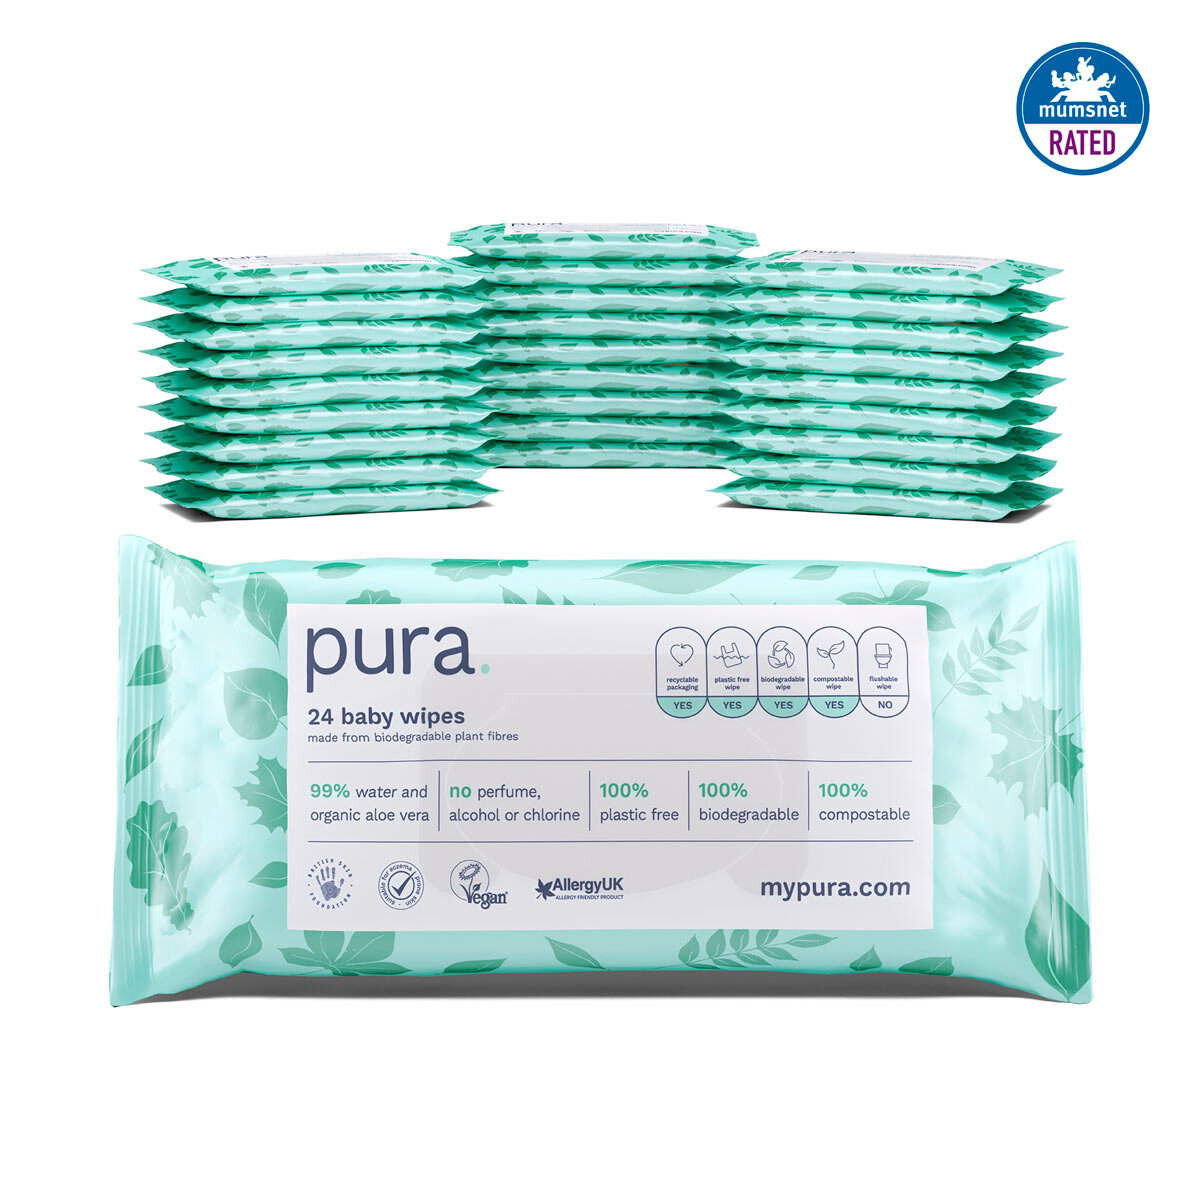 Pura 100% Plastic Free, Biodegradable Baby Wipes, 28 x 24 Pack (672 Total)